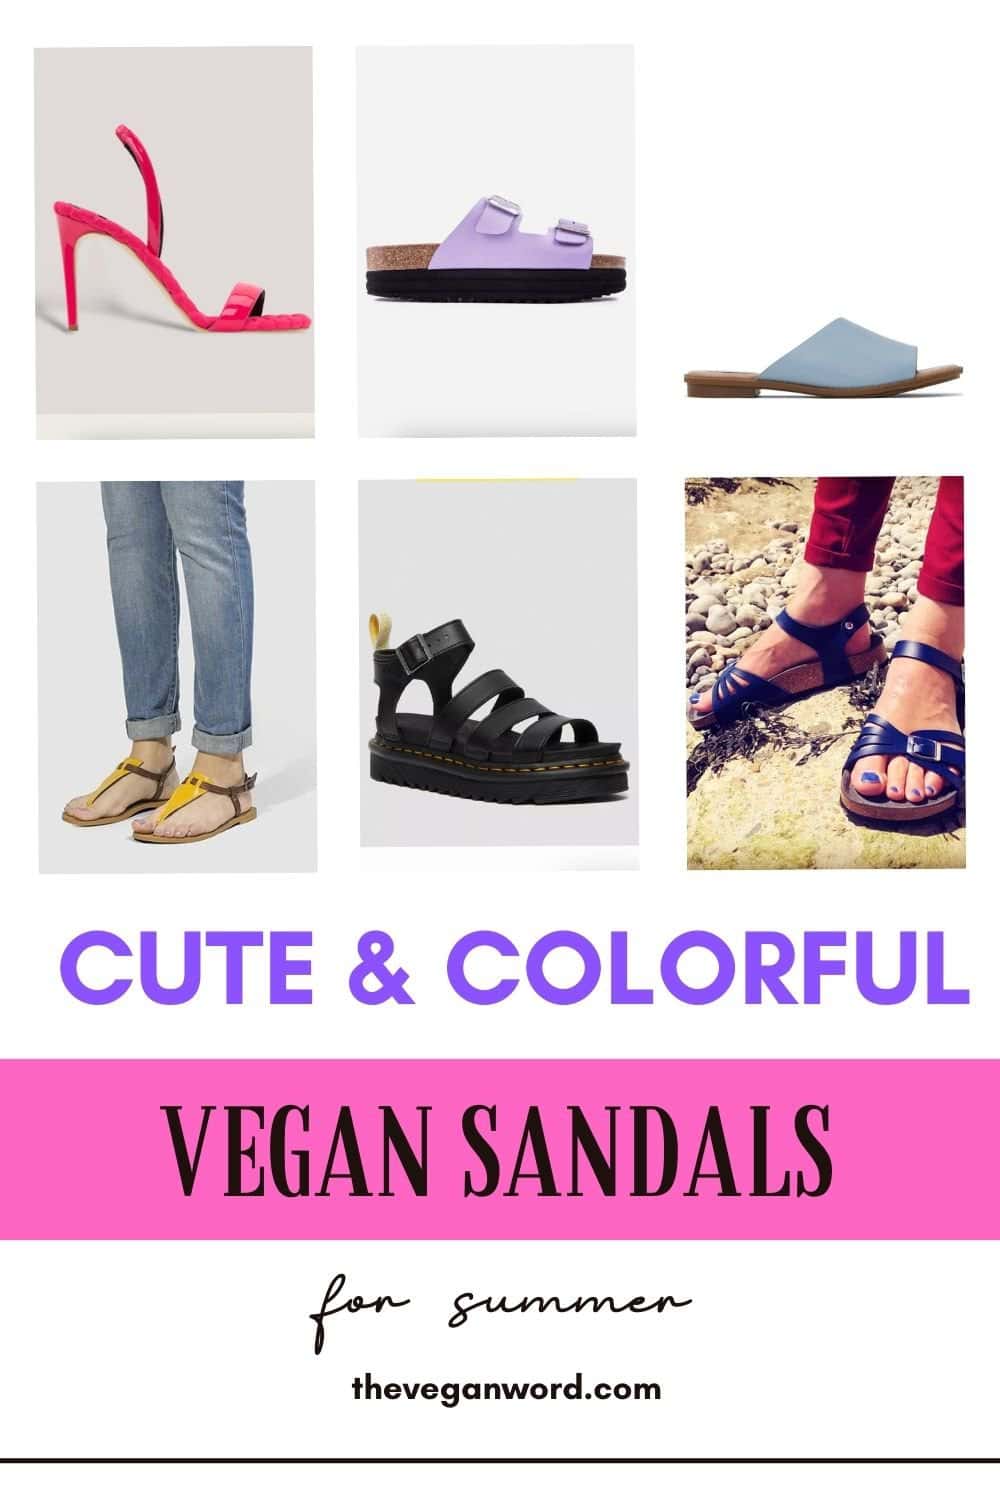 Pinterest image of different sandal styles with text that reads "cute & colourful vegan sandals for summer"